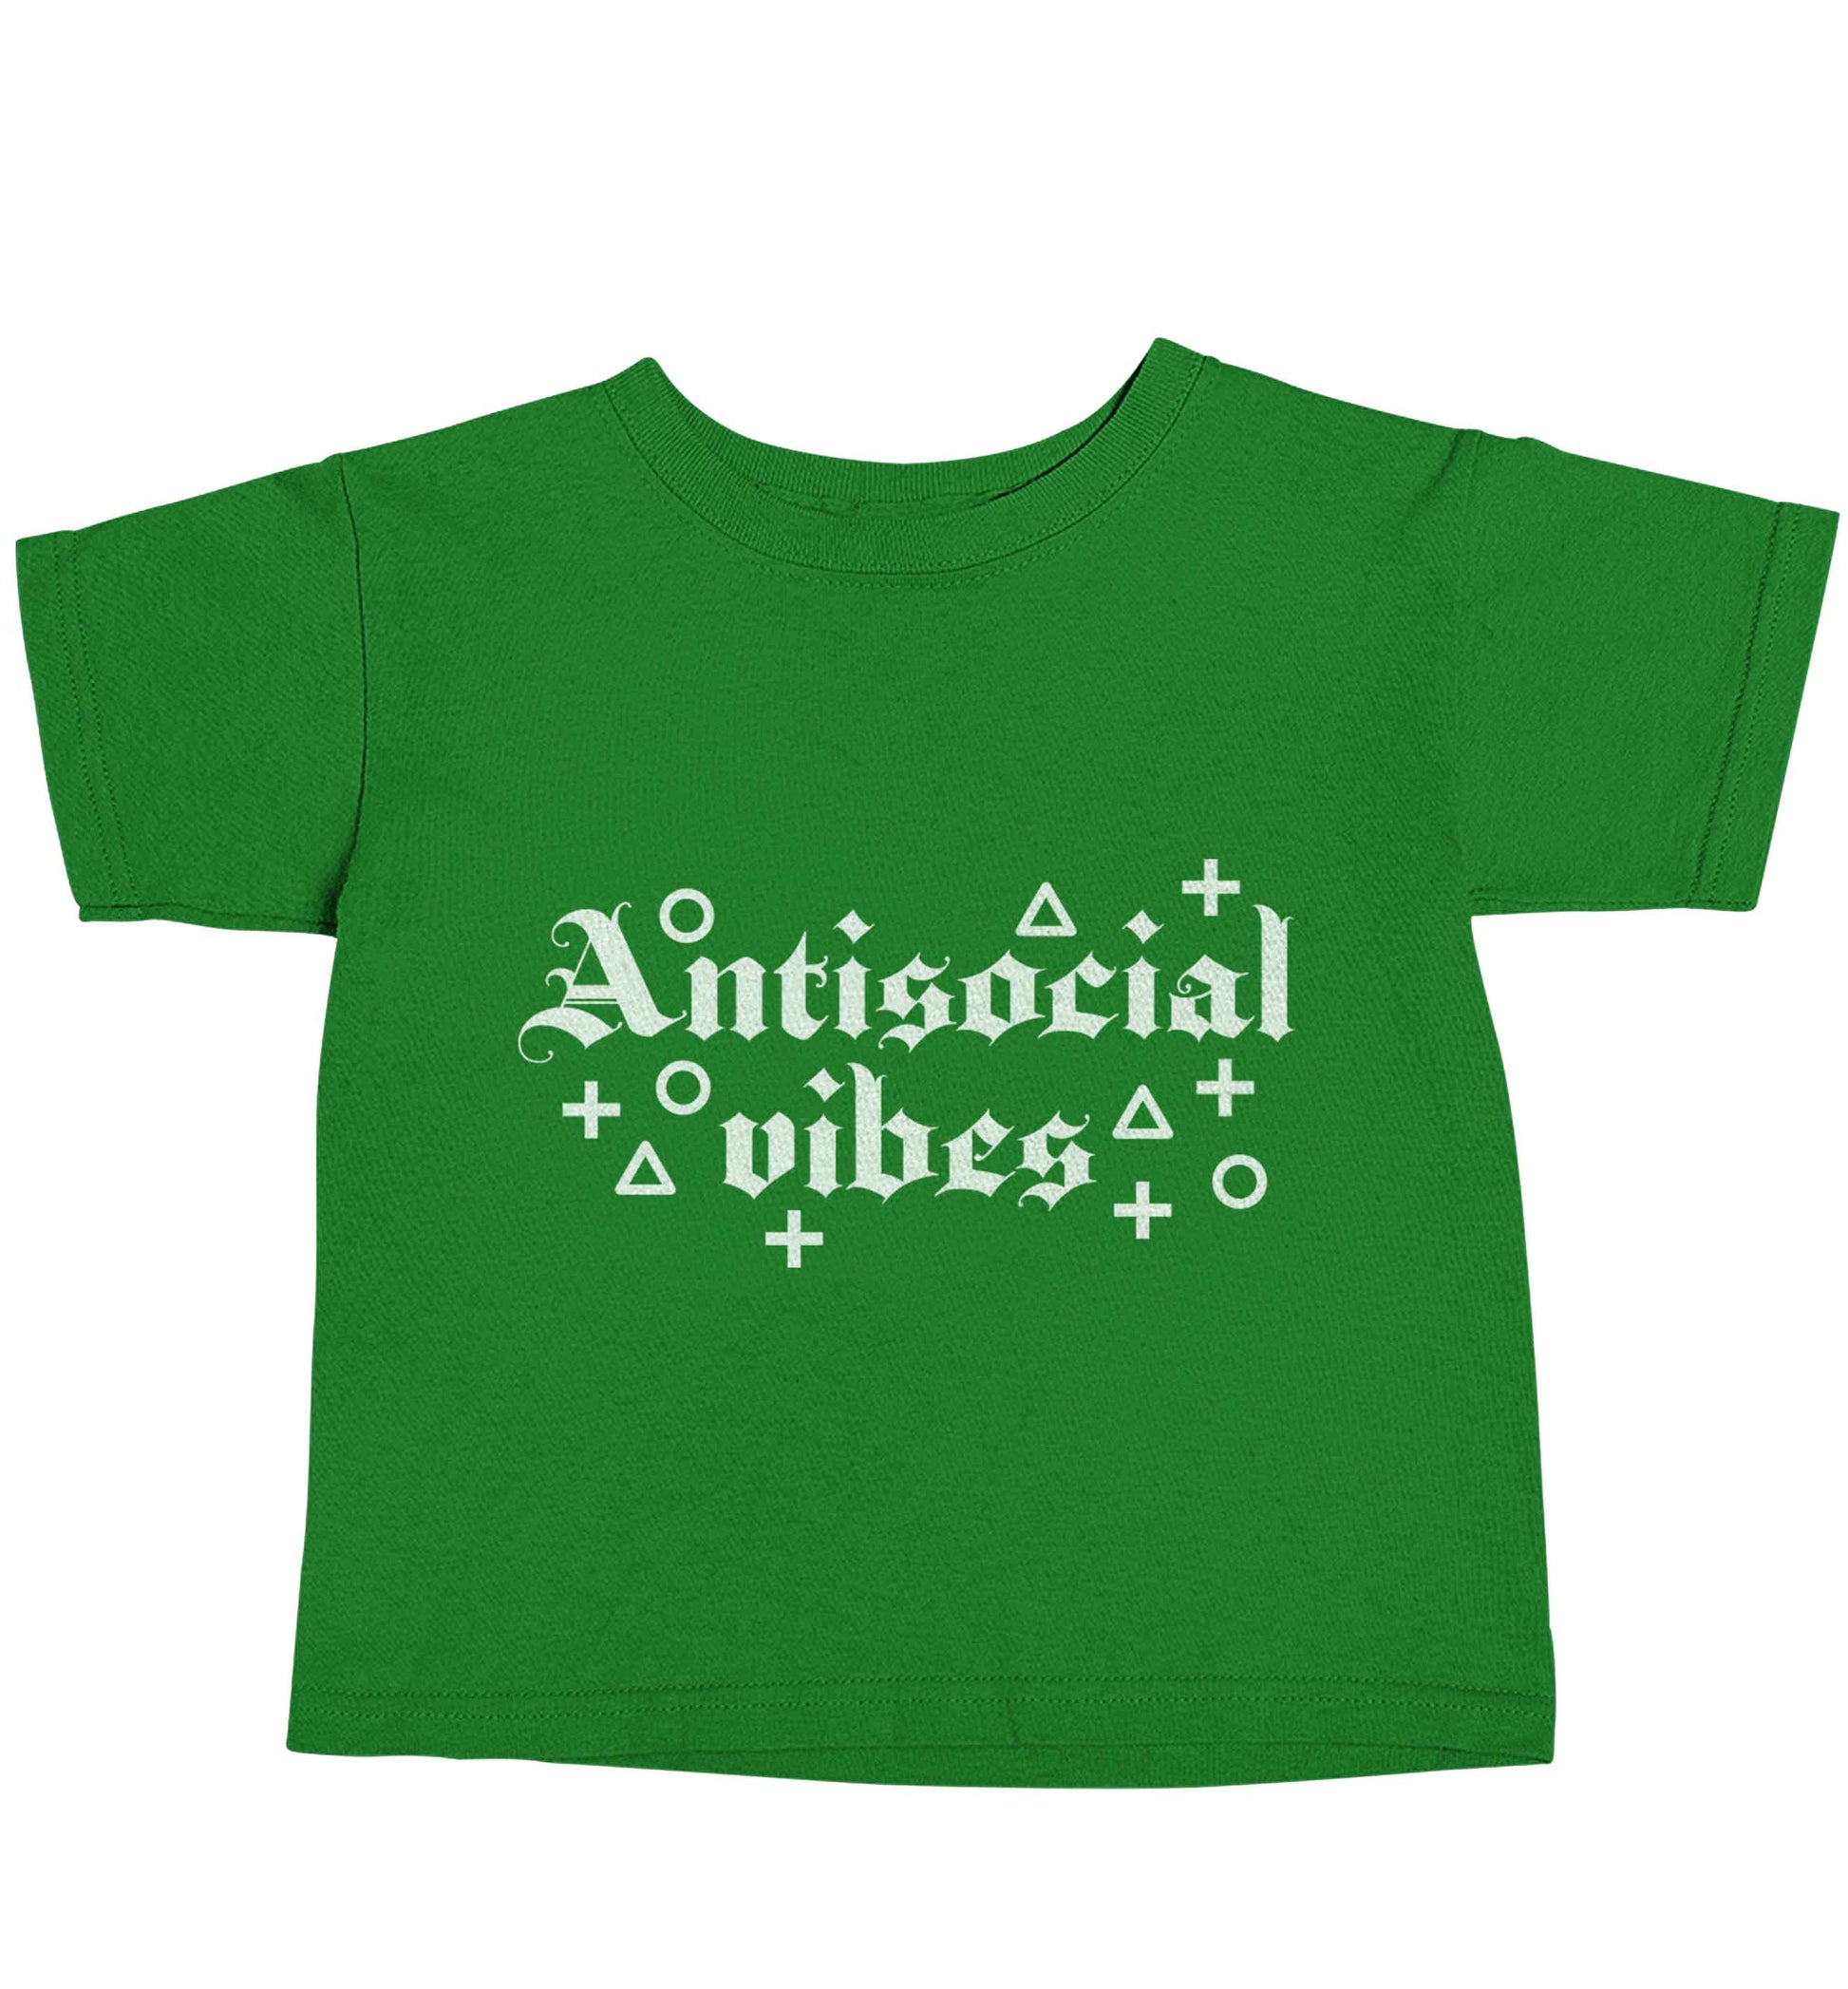 Antisocial vibes green baby toddler Tshirt 2 Years